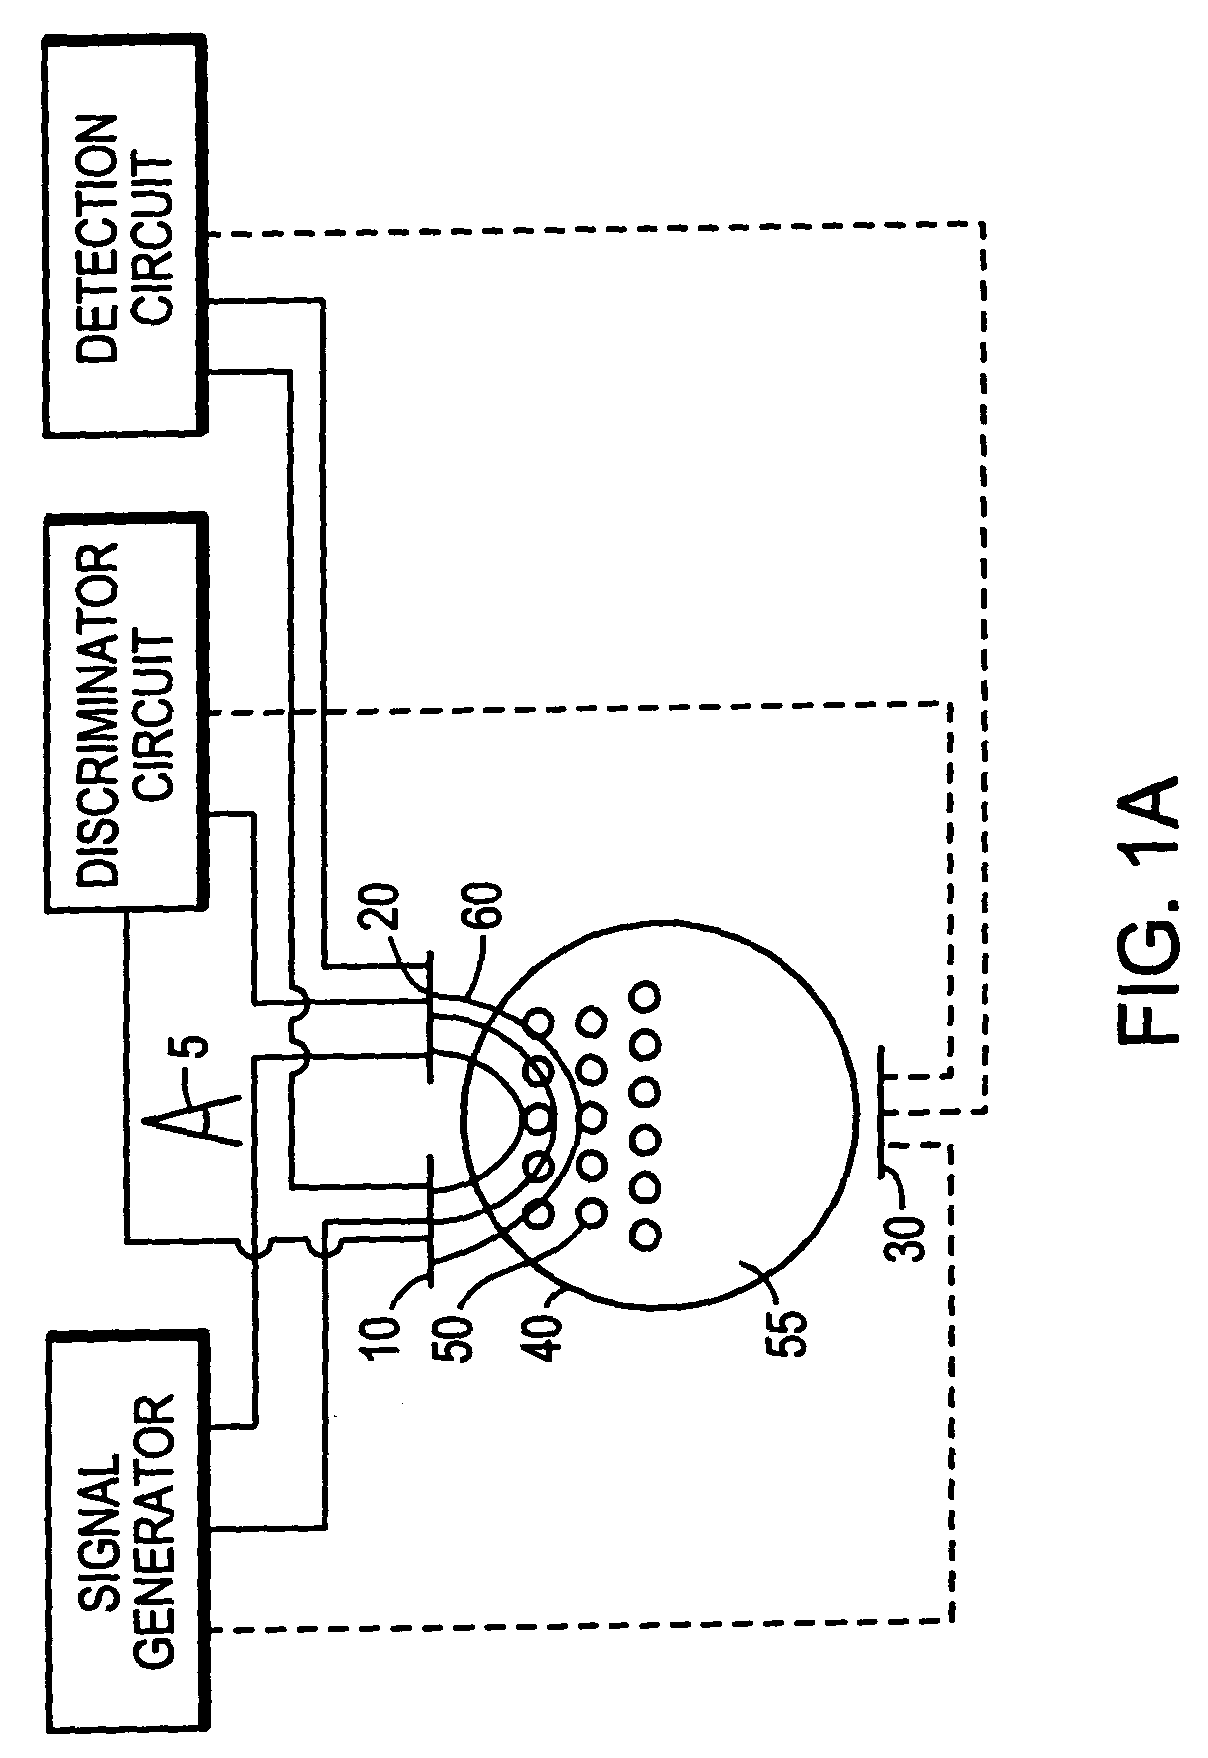 Method and apparatus for determining properties of an electrophoretic display